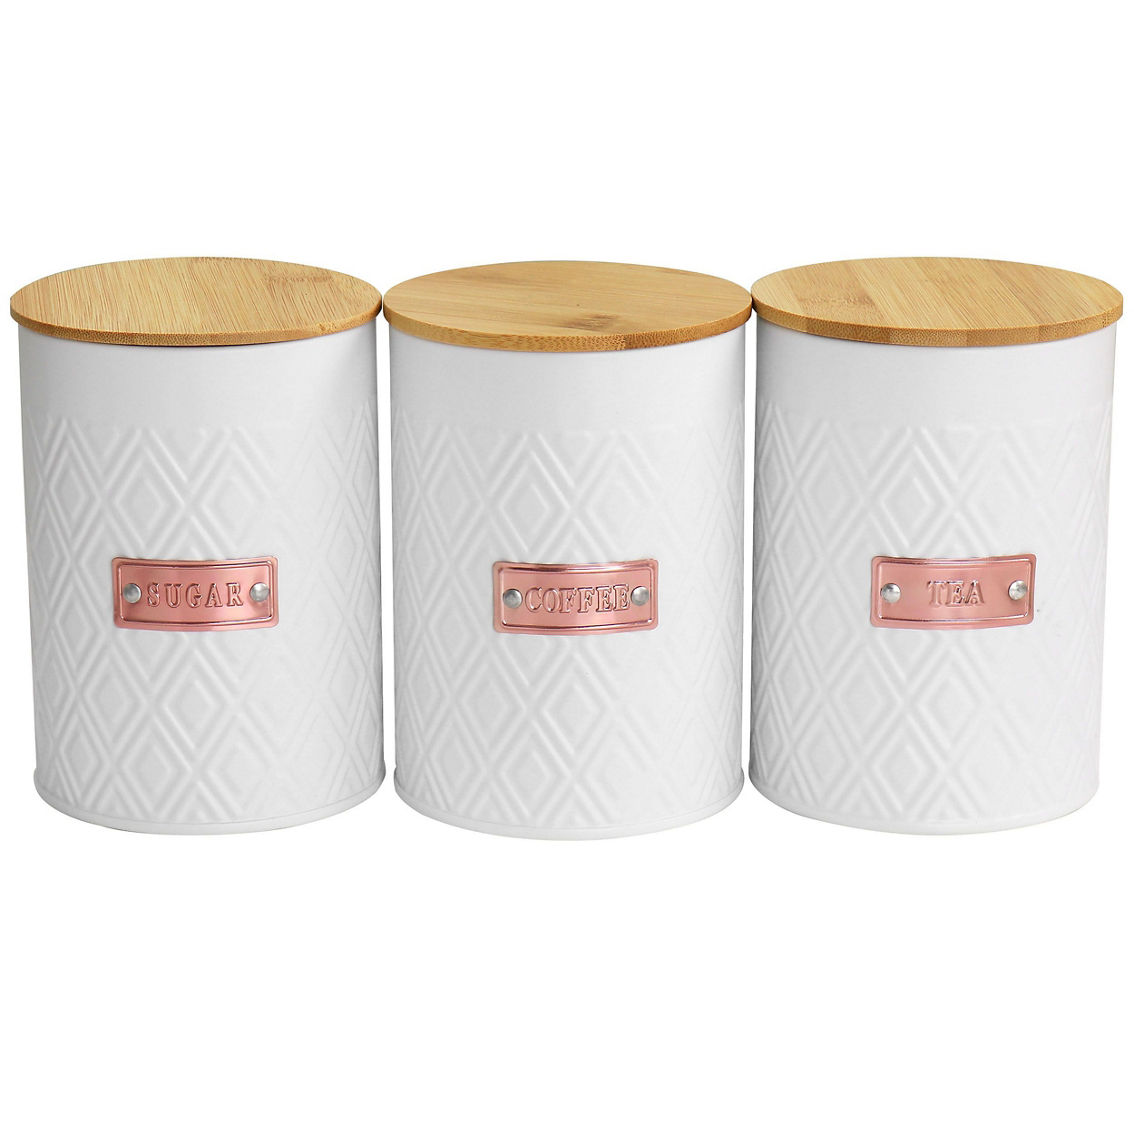 MegaChef Kitchen Food Storage and Organization 4 Piece Argyle Canister Set in Wh - Image 4 of 5